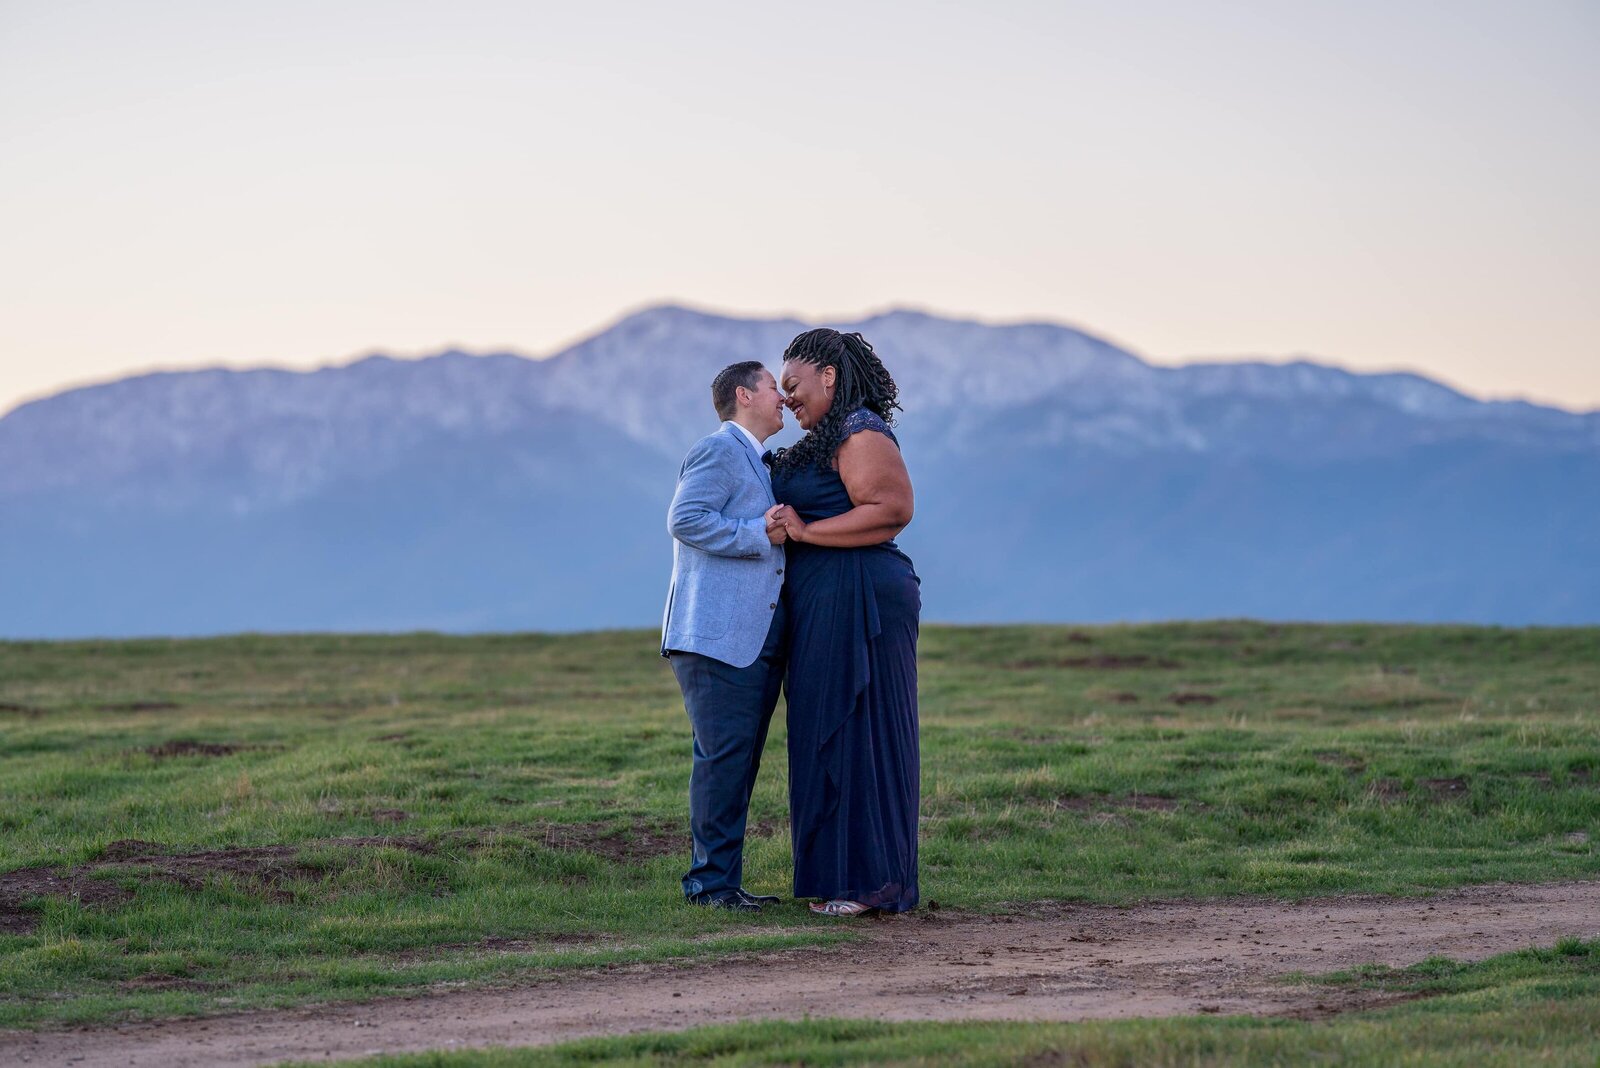 Black skinned woman wearing blue dress holding both hands of woman in blue pants and lightblue jacket kissing in front of mountain sunset.